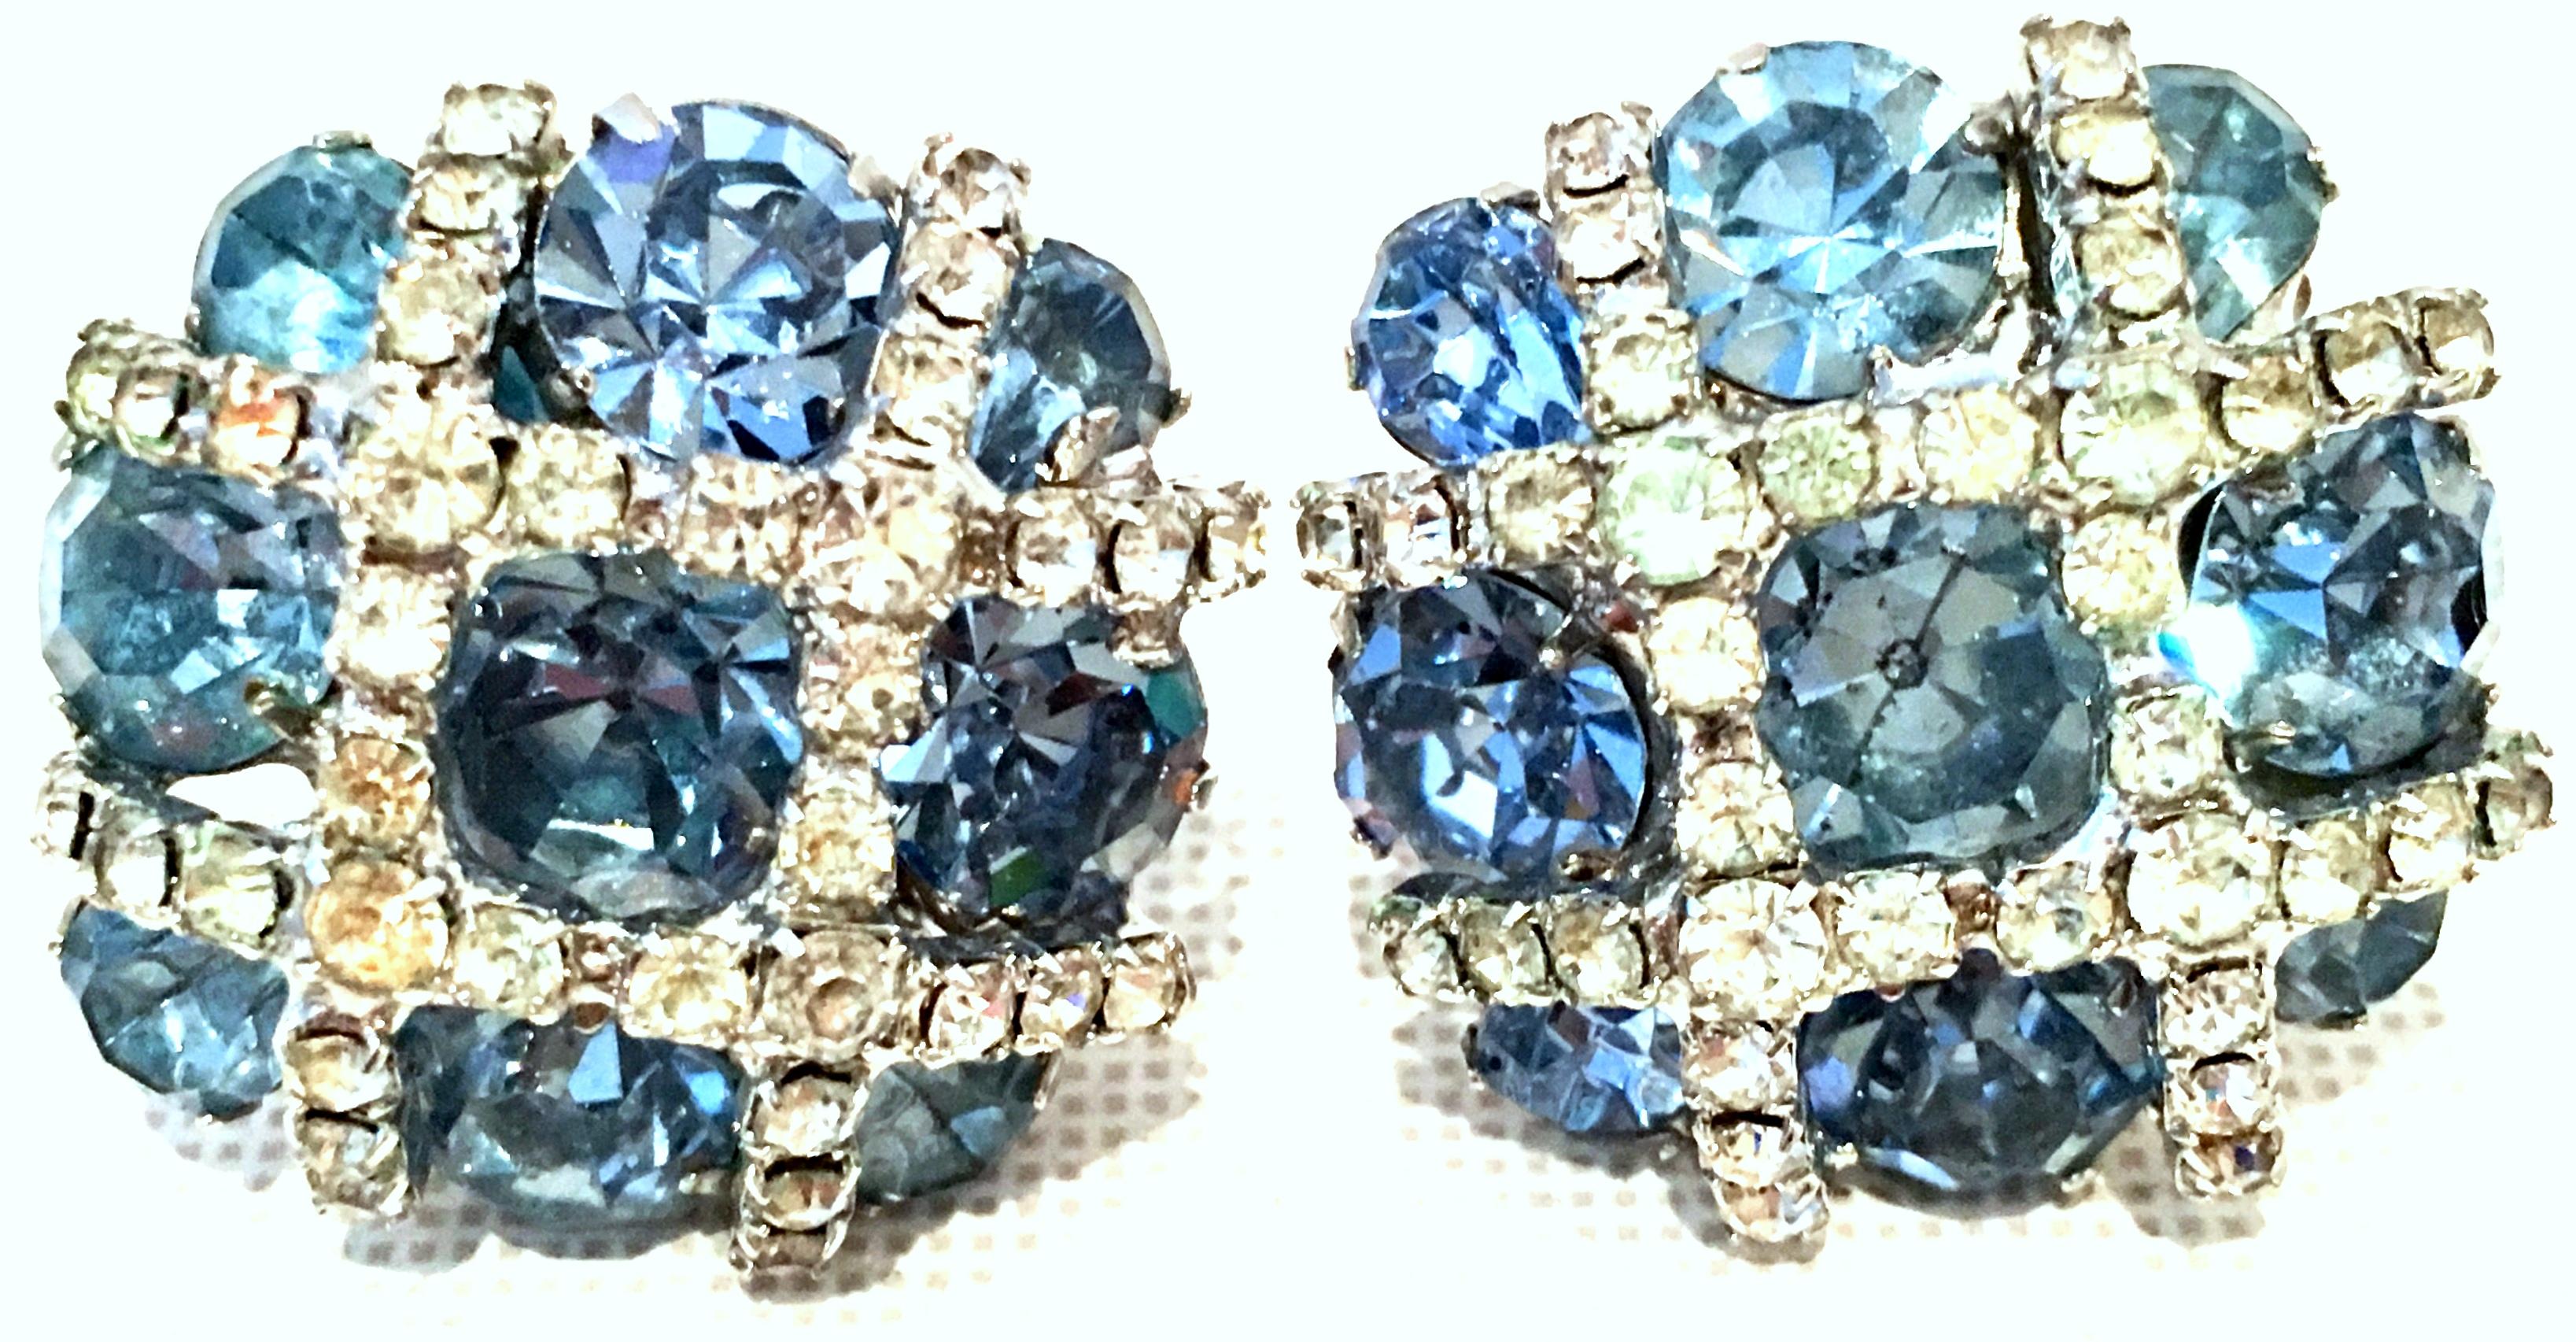 Mid-20th Century Pair Of Silver & Austrian Crystal Dimensional Earrings By, Kramer. These silver rhodium plate clip style earrings feature fancy prong set brilliant cut and faceted sapphire blue pear and round shaped stone. The applied silver criss